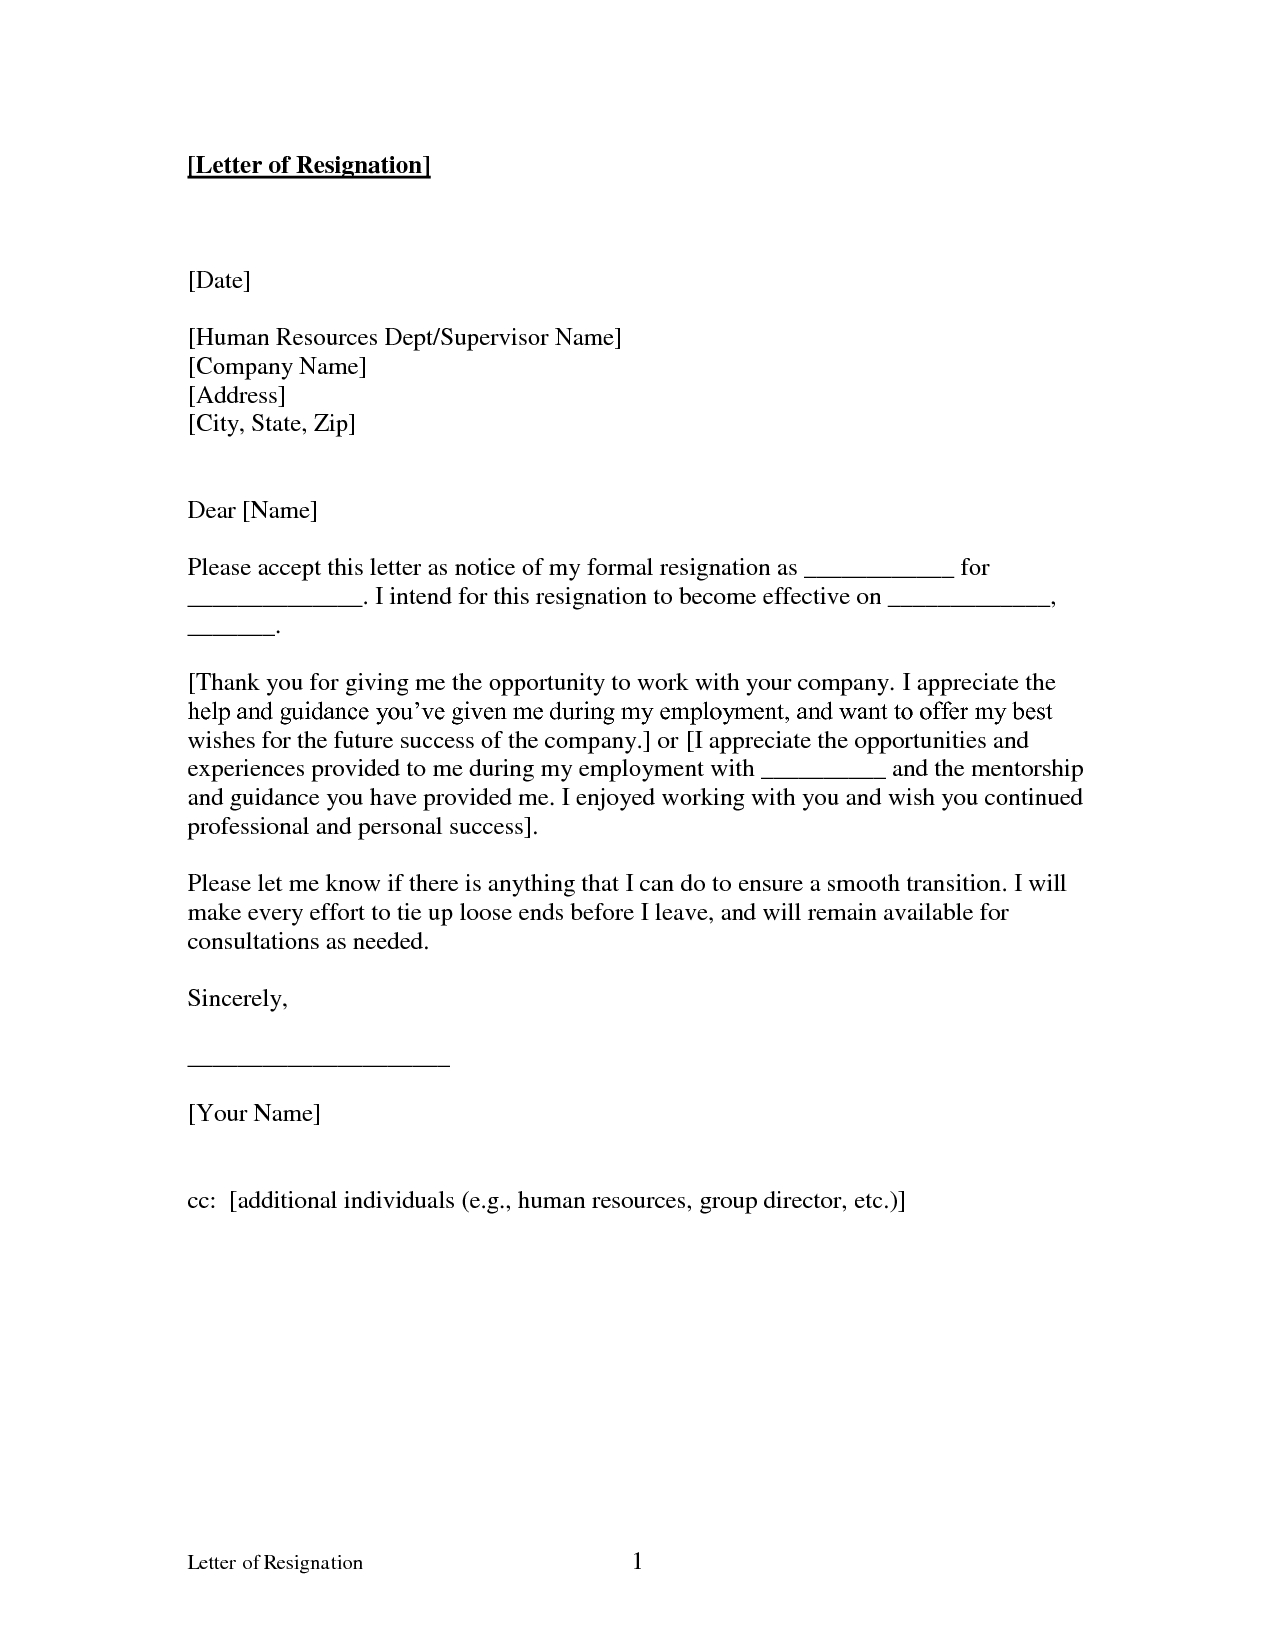 Real Estate Introduction Letter to Friends Template - Printable Sample Letter Of Resignation form